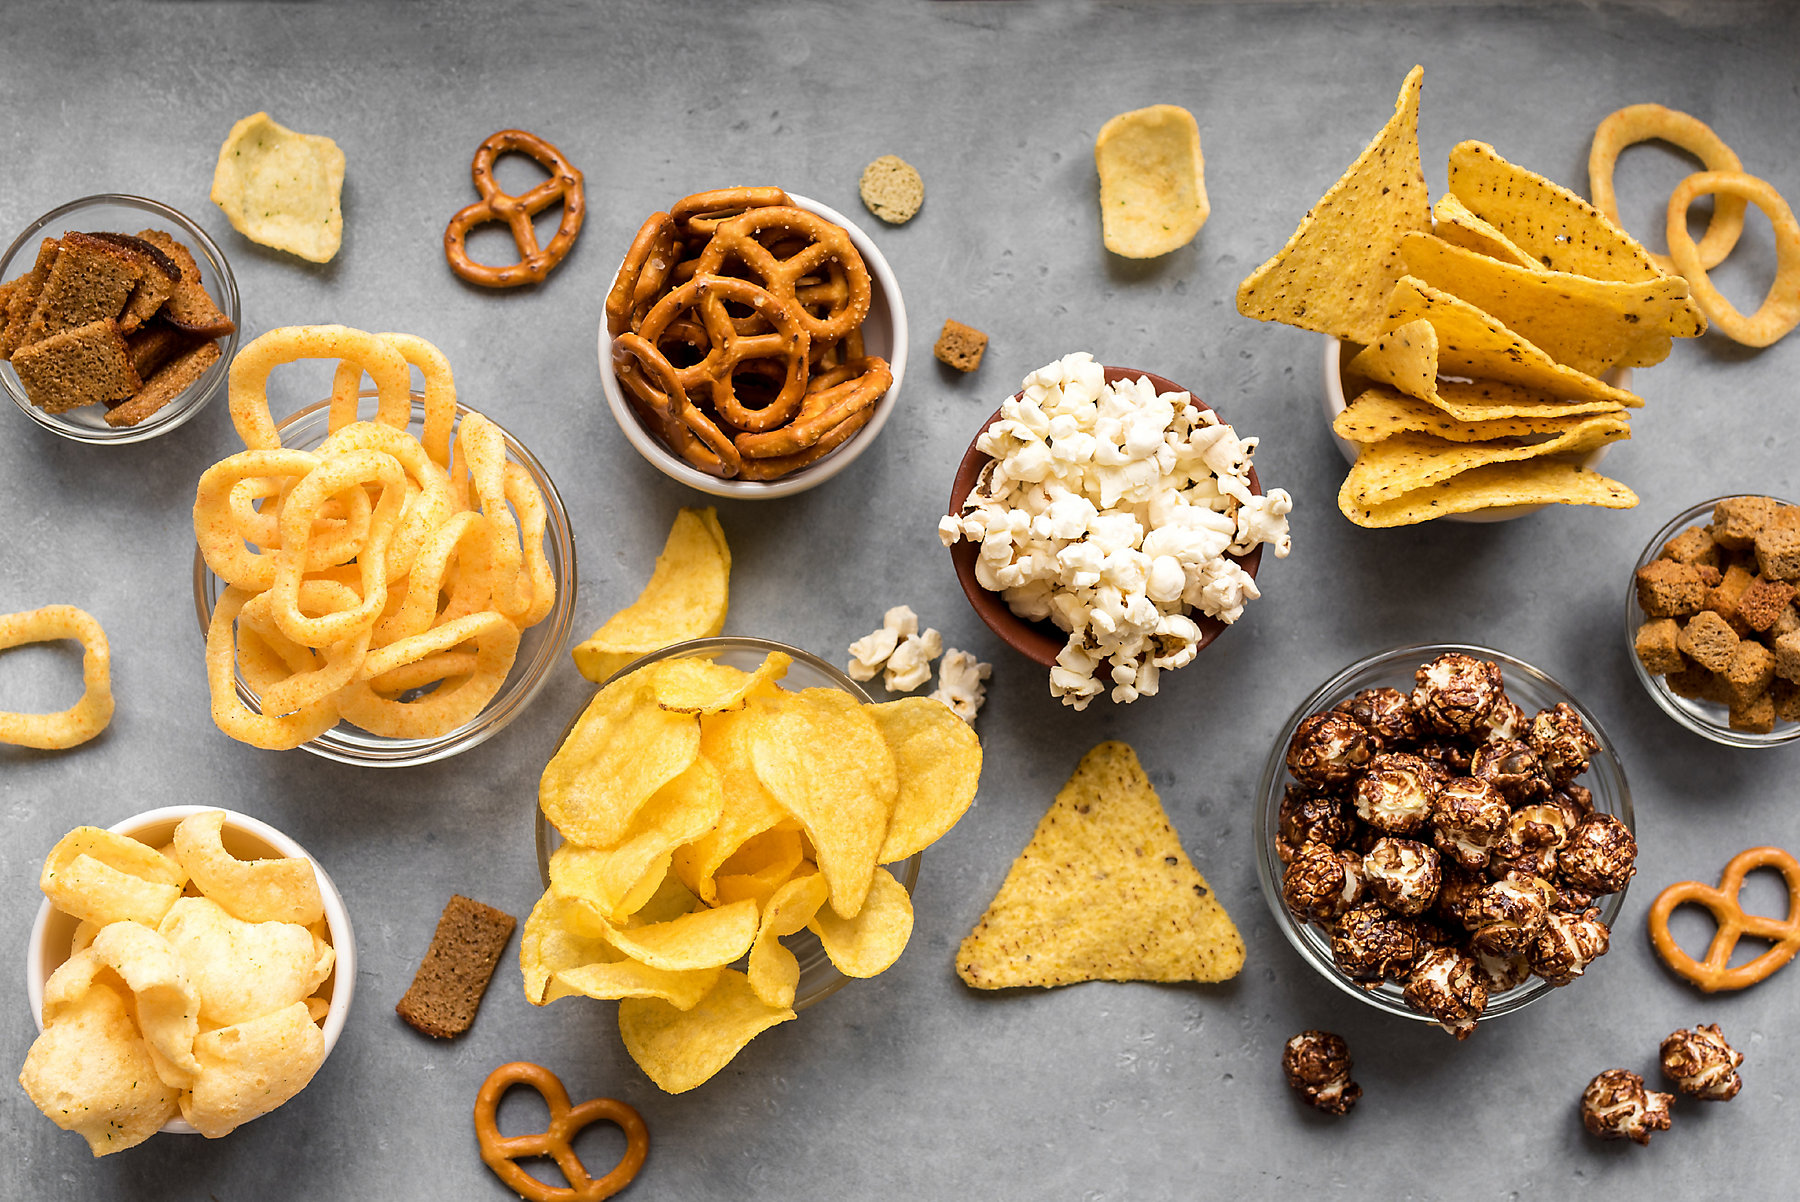 Assortment of Unhealthy Snacks: chips, popcorn, nachos, pretzels, onion rings in bowls, top view